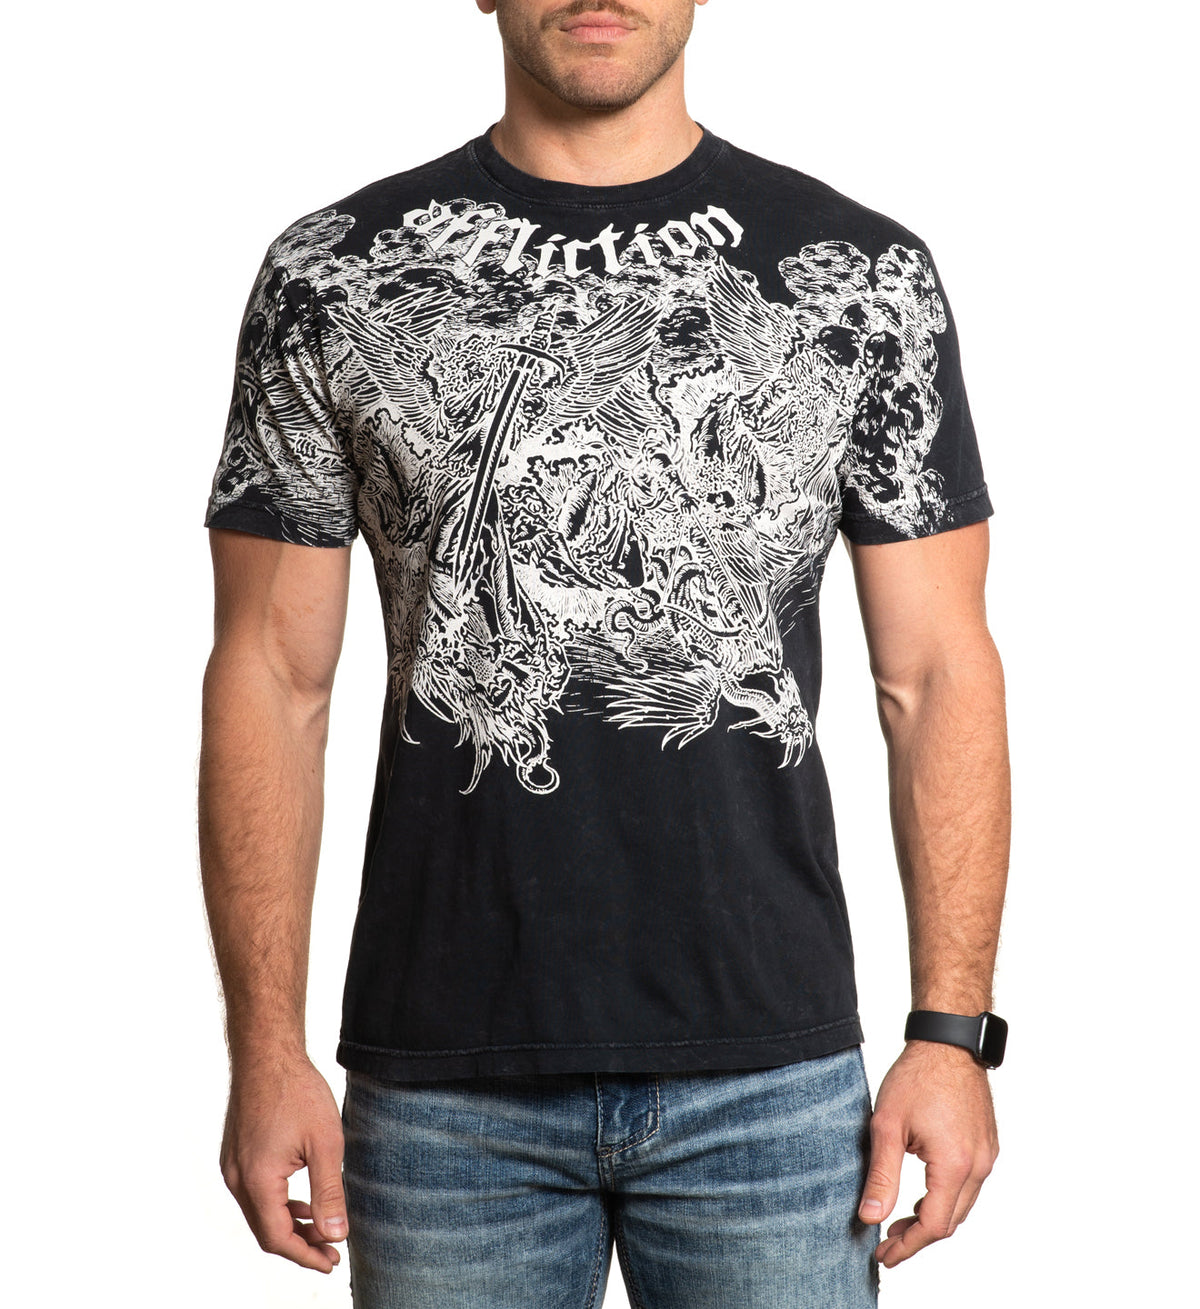 Angels - Affliction Clothing